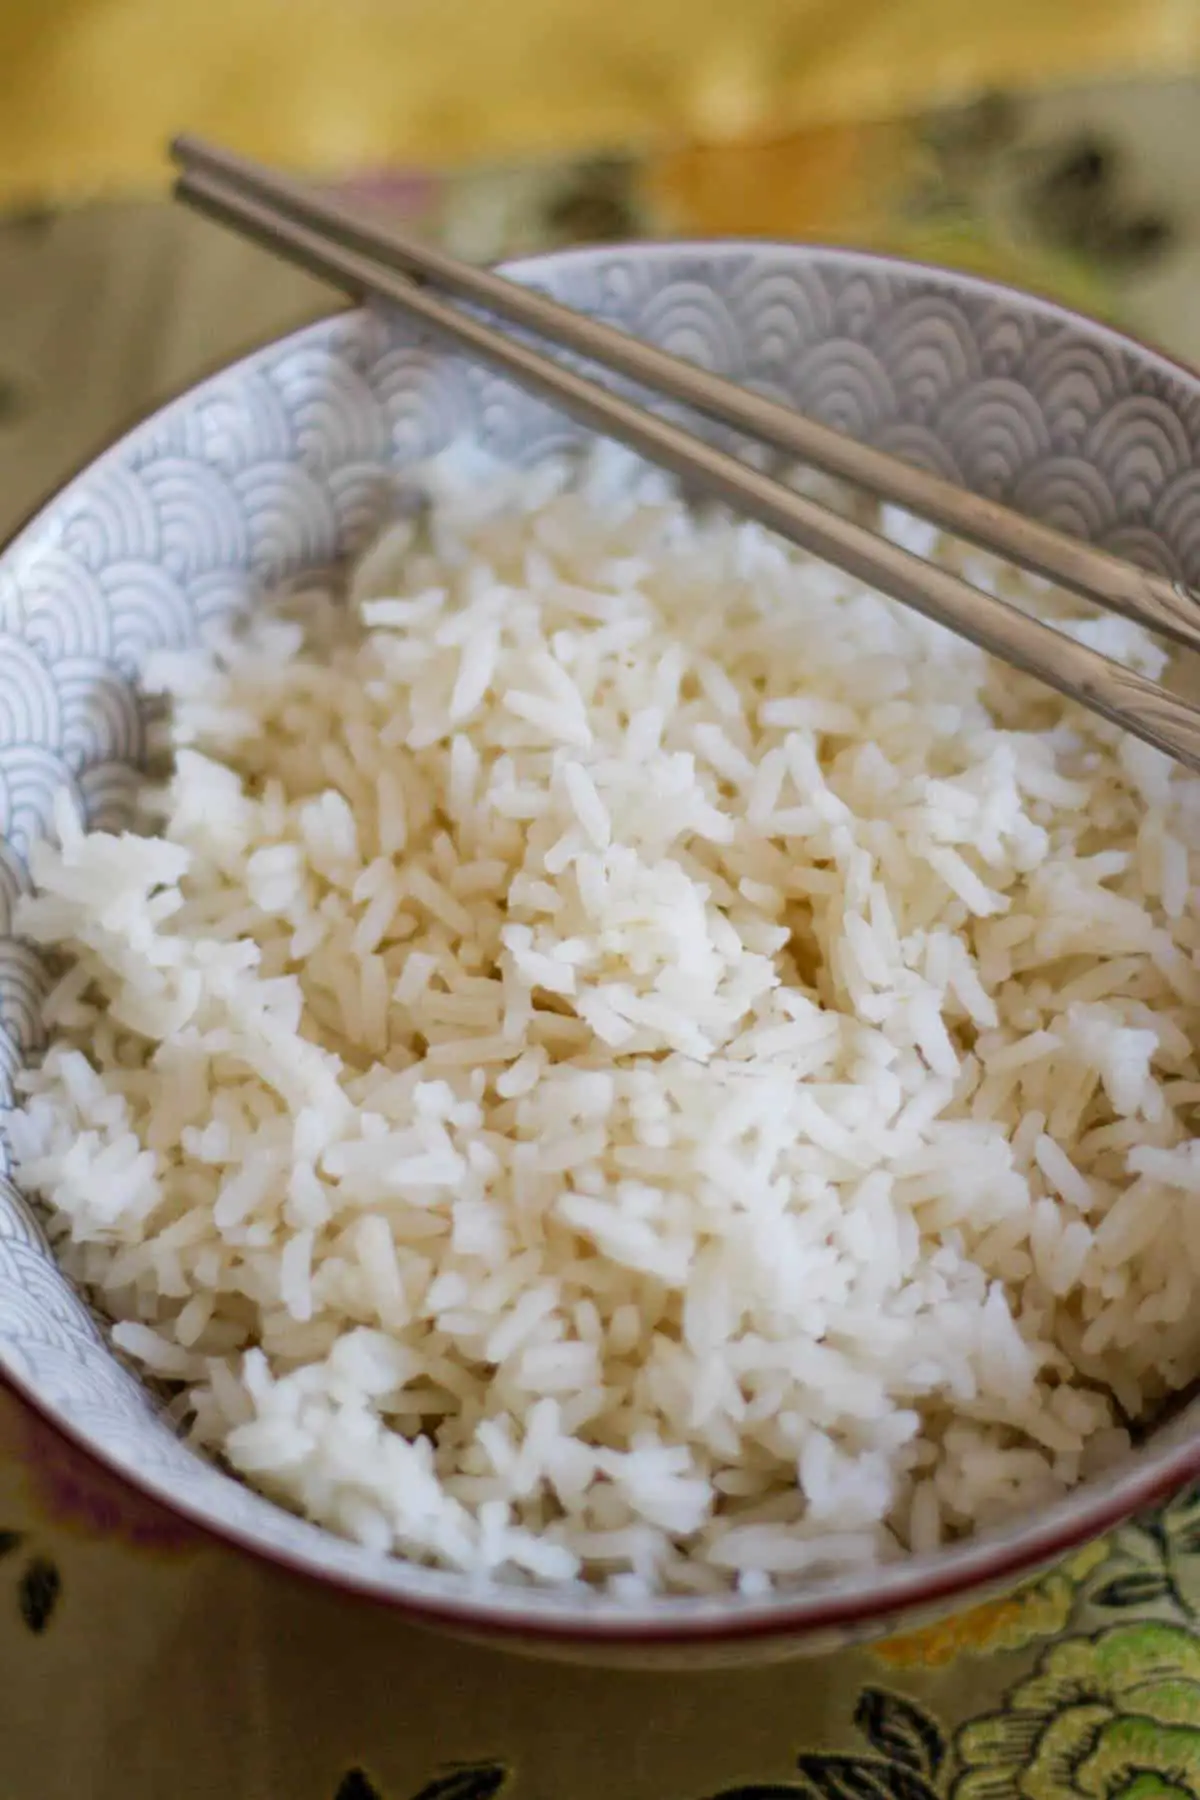 A patterned bowl containing steamed rice. There is a pair of silver chopsticks resting across the bowl.